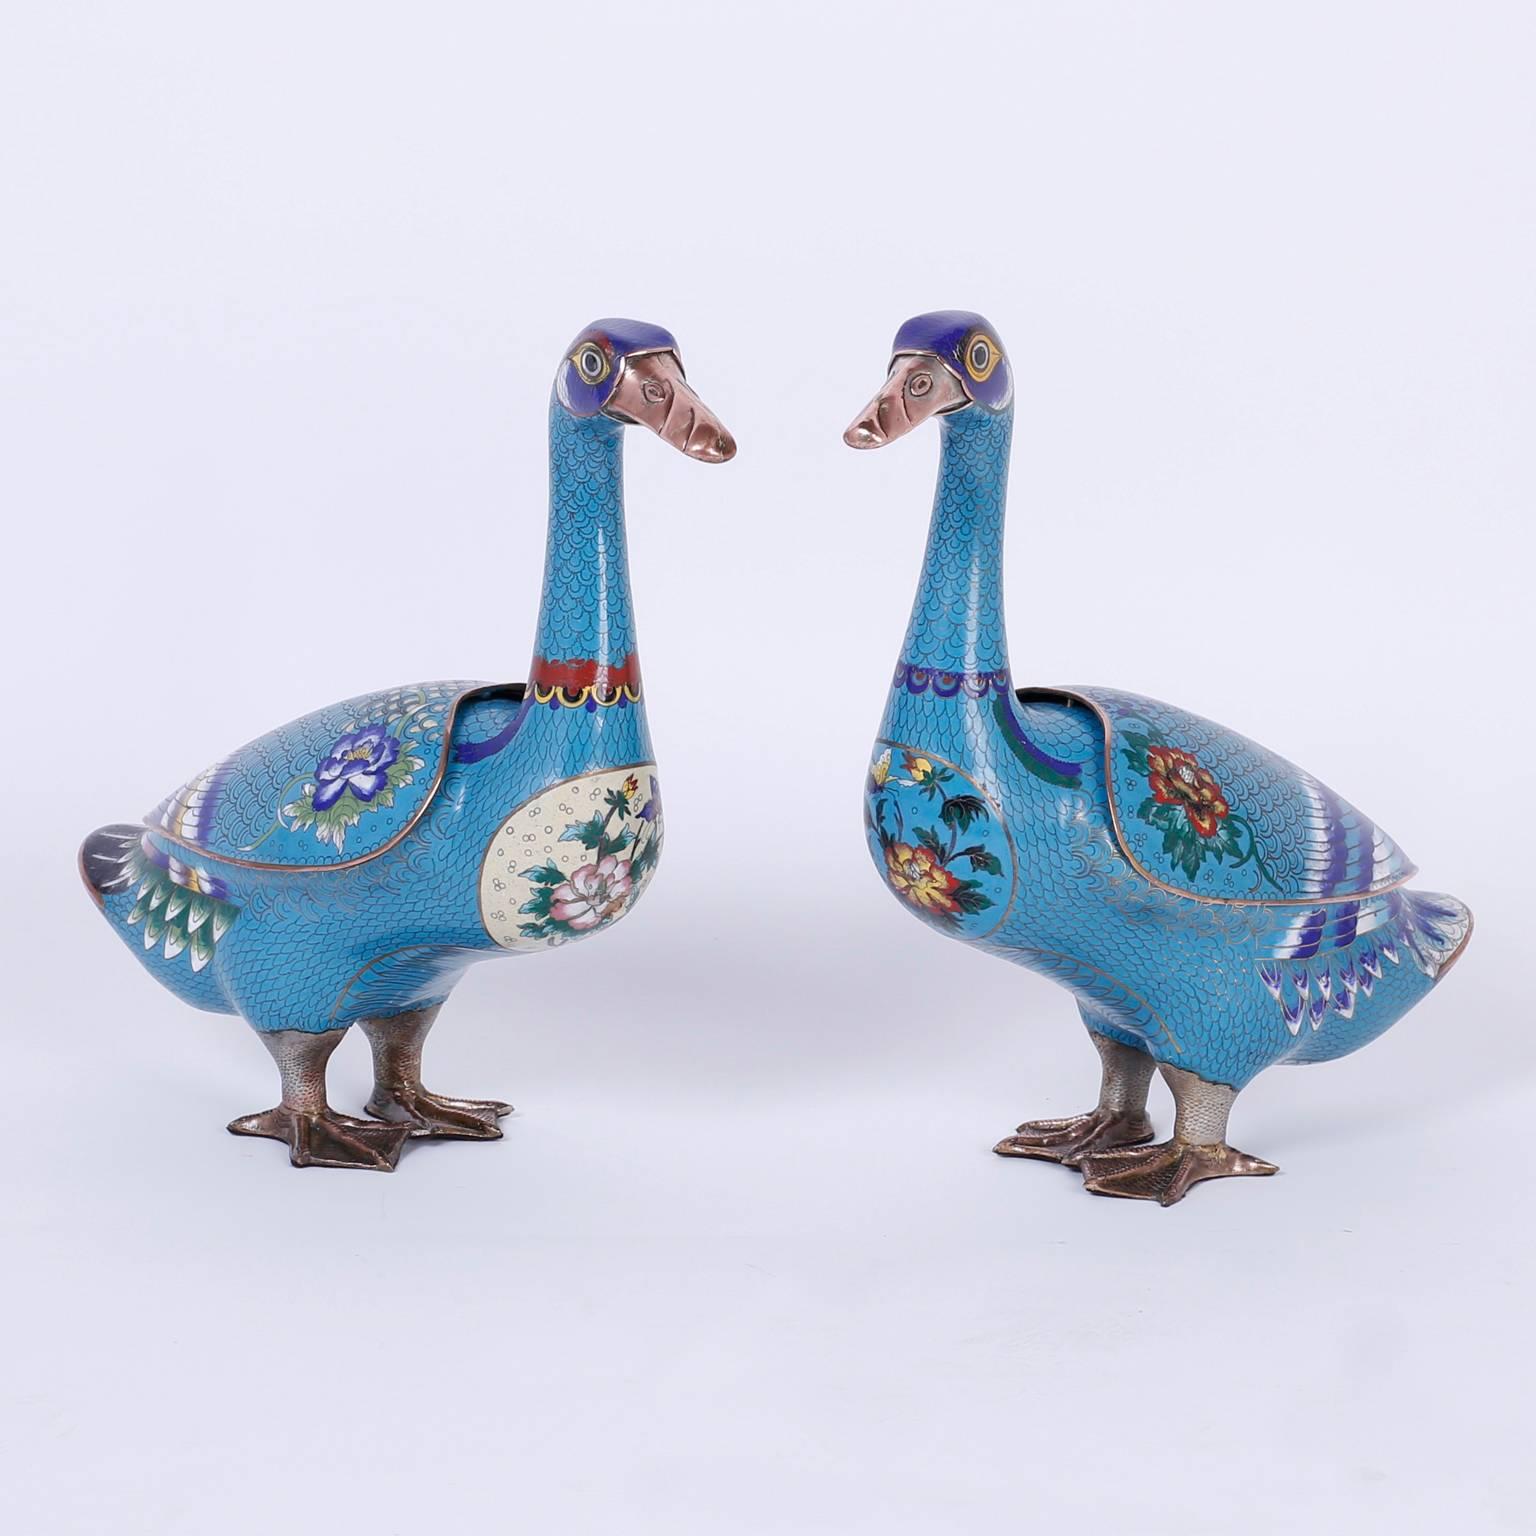 Pair of cloisonné or enamel on copper duck censors or incense burners decorated with charming panels of fauna and flora over a soothing blue background. The wings are removable lids. Can be used for storage, function or enjoyed as objects of art.